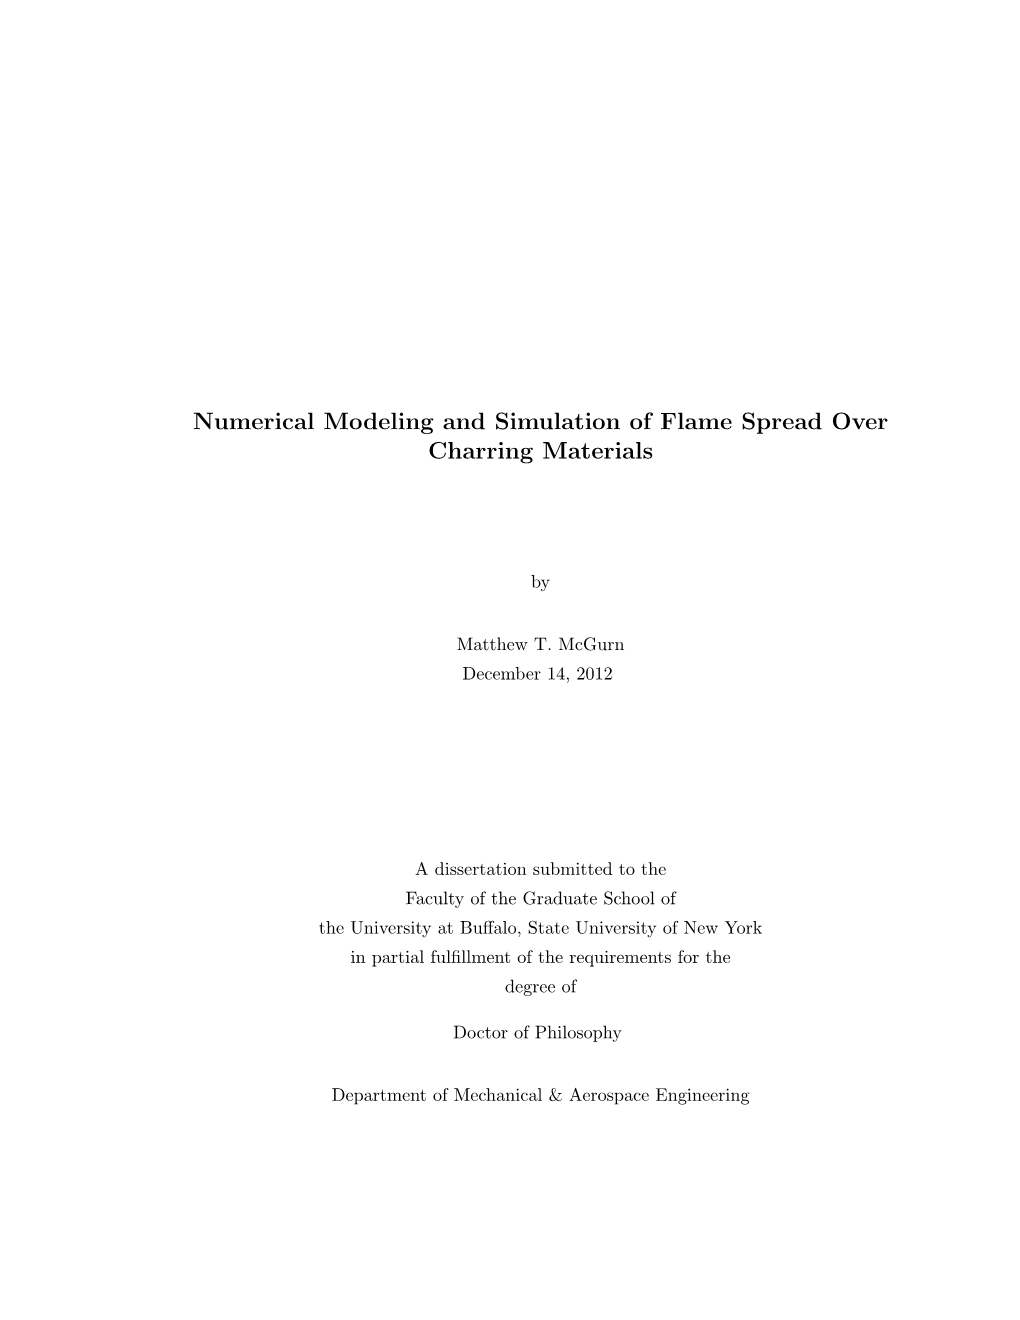 Numerical Modeling and Simulation of Flame Spread Over Charring Materials